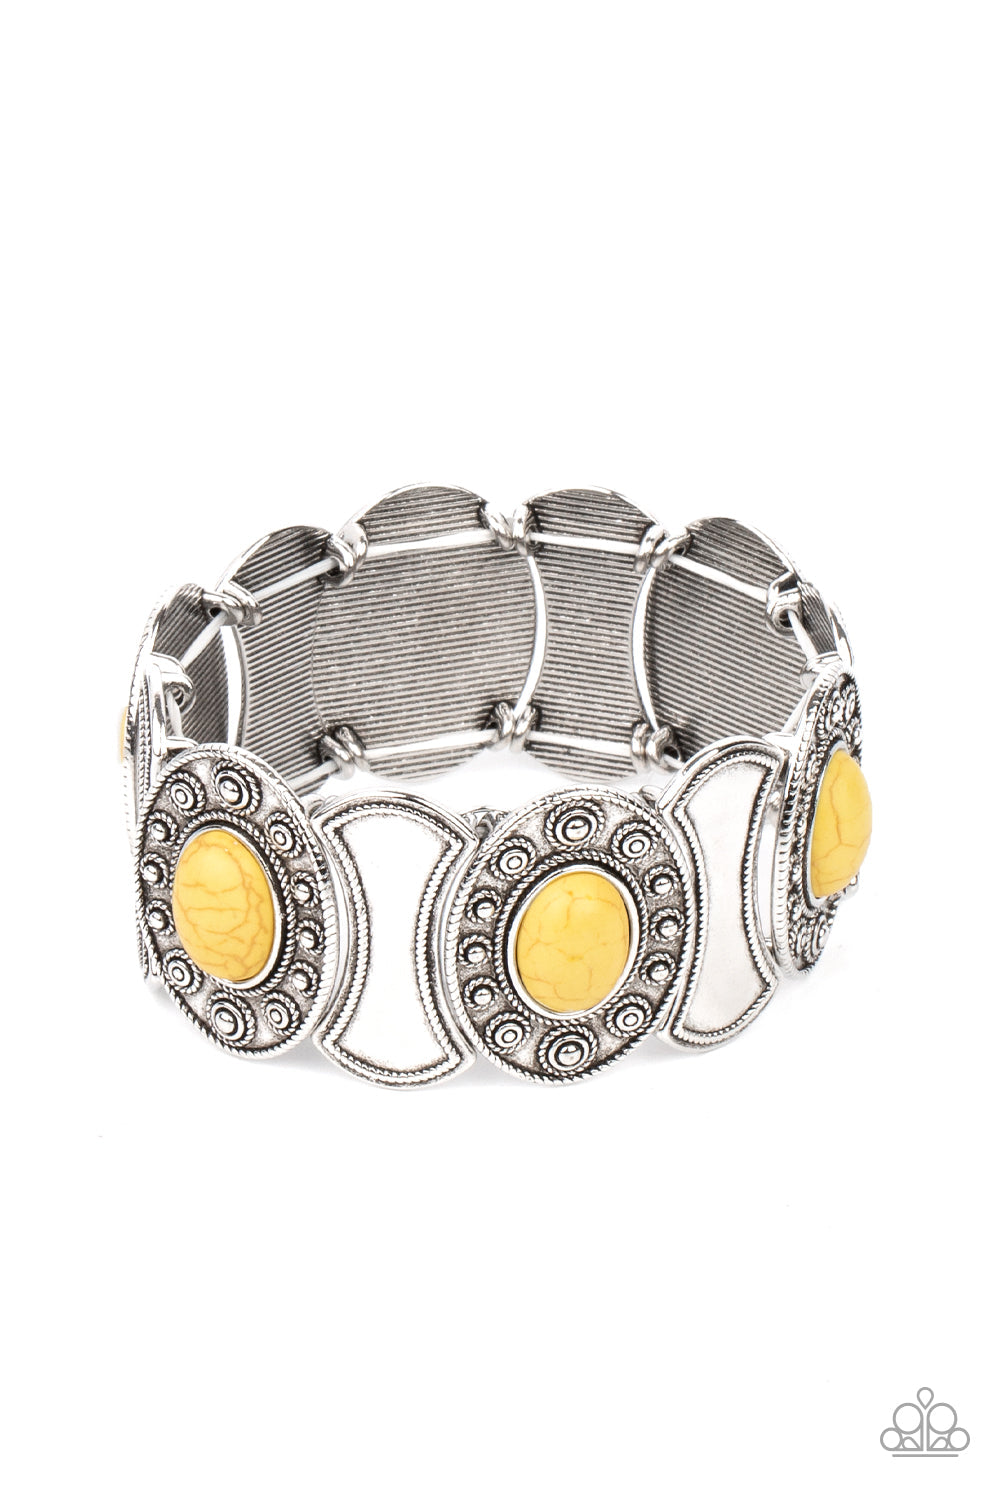 Desert Relic - Yellow Stone - Silver Stretchy Bracelet - Paparazzi Accessories - 
Dotted in ornate silver studs, yellow stone embellished silver frames join hammered silver plates along stretchy bands around the wrist for a colorful seasonal flair. Sold as one individual bracelet.
